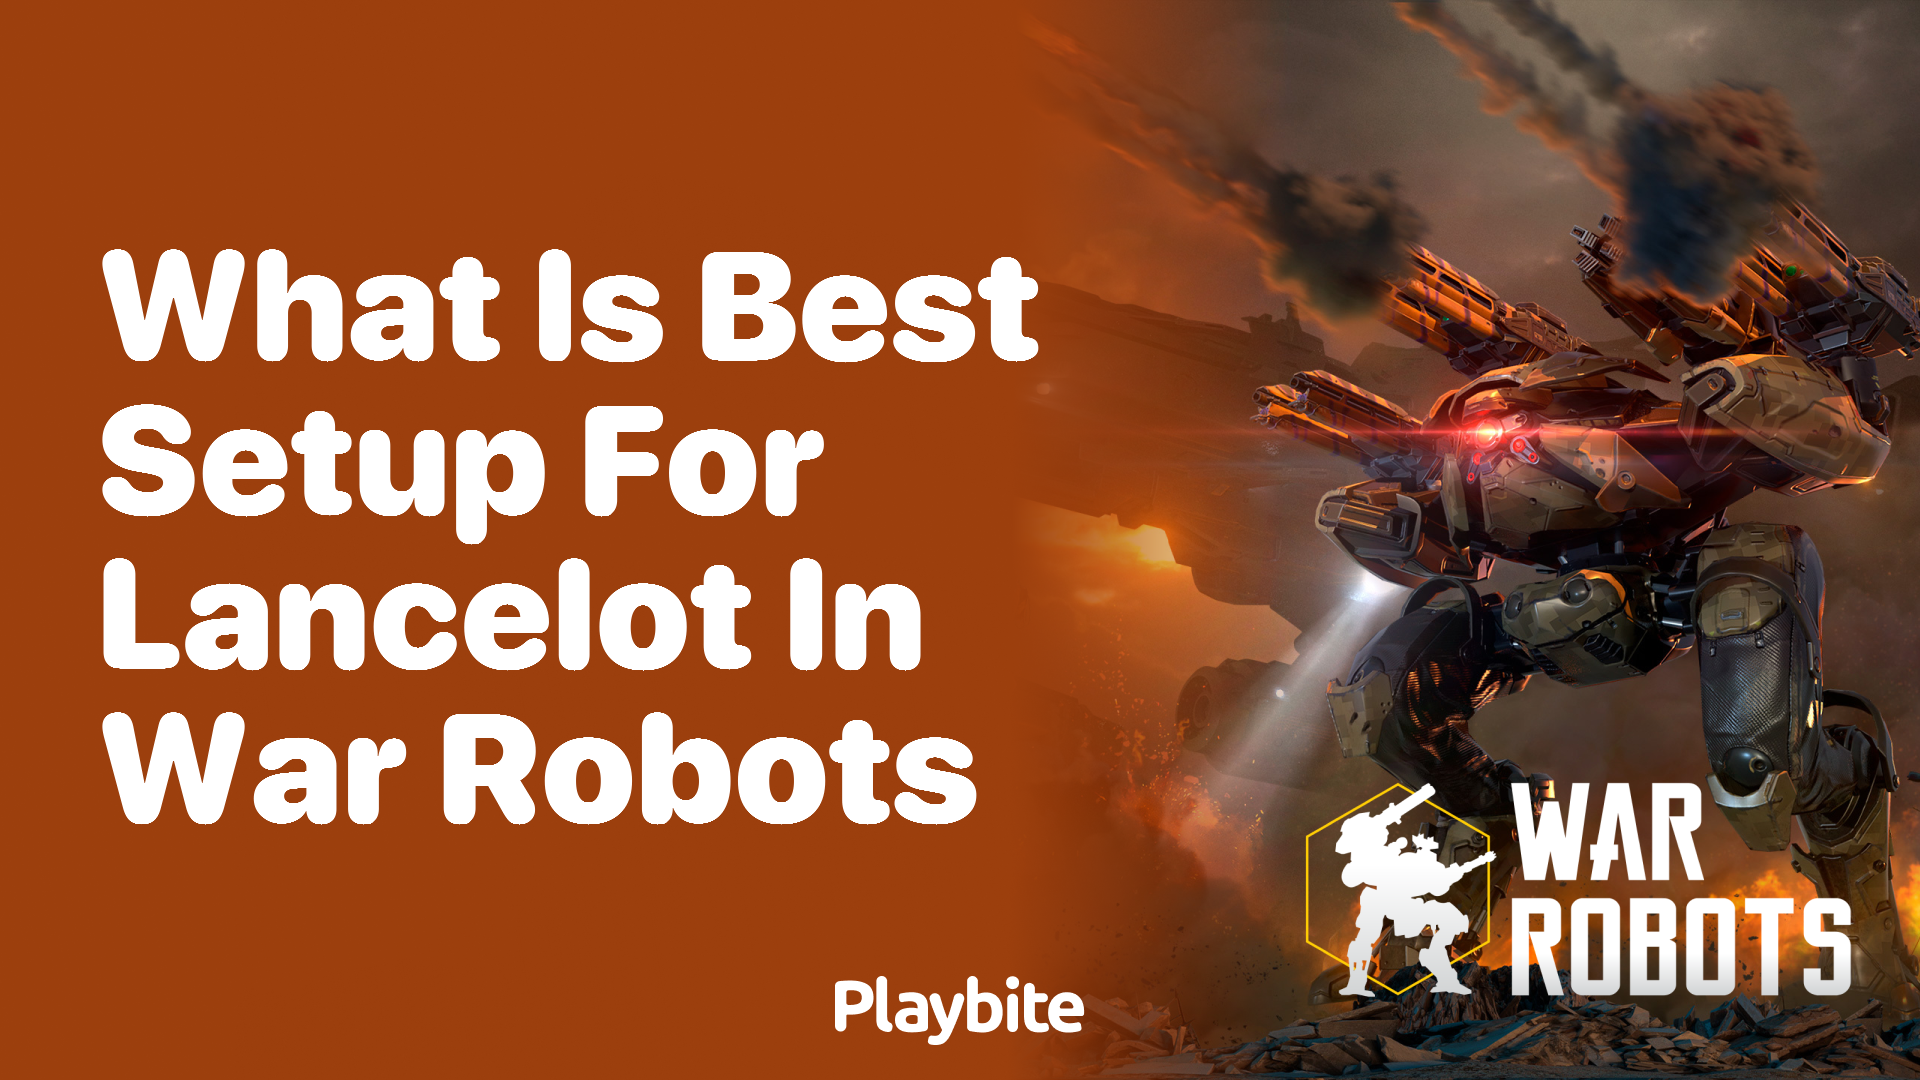 What is the Best Setup for Lancelot in War Robots?